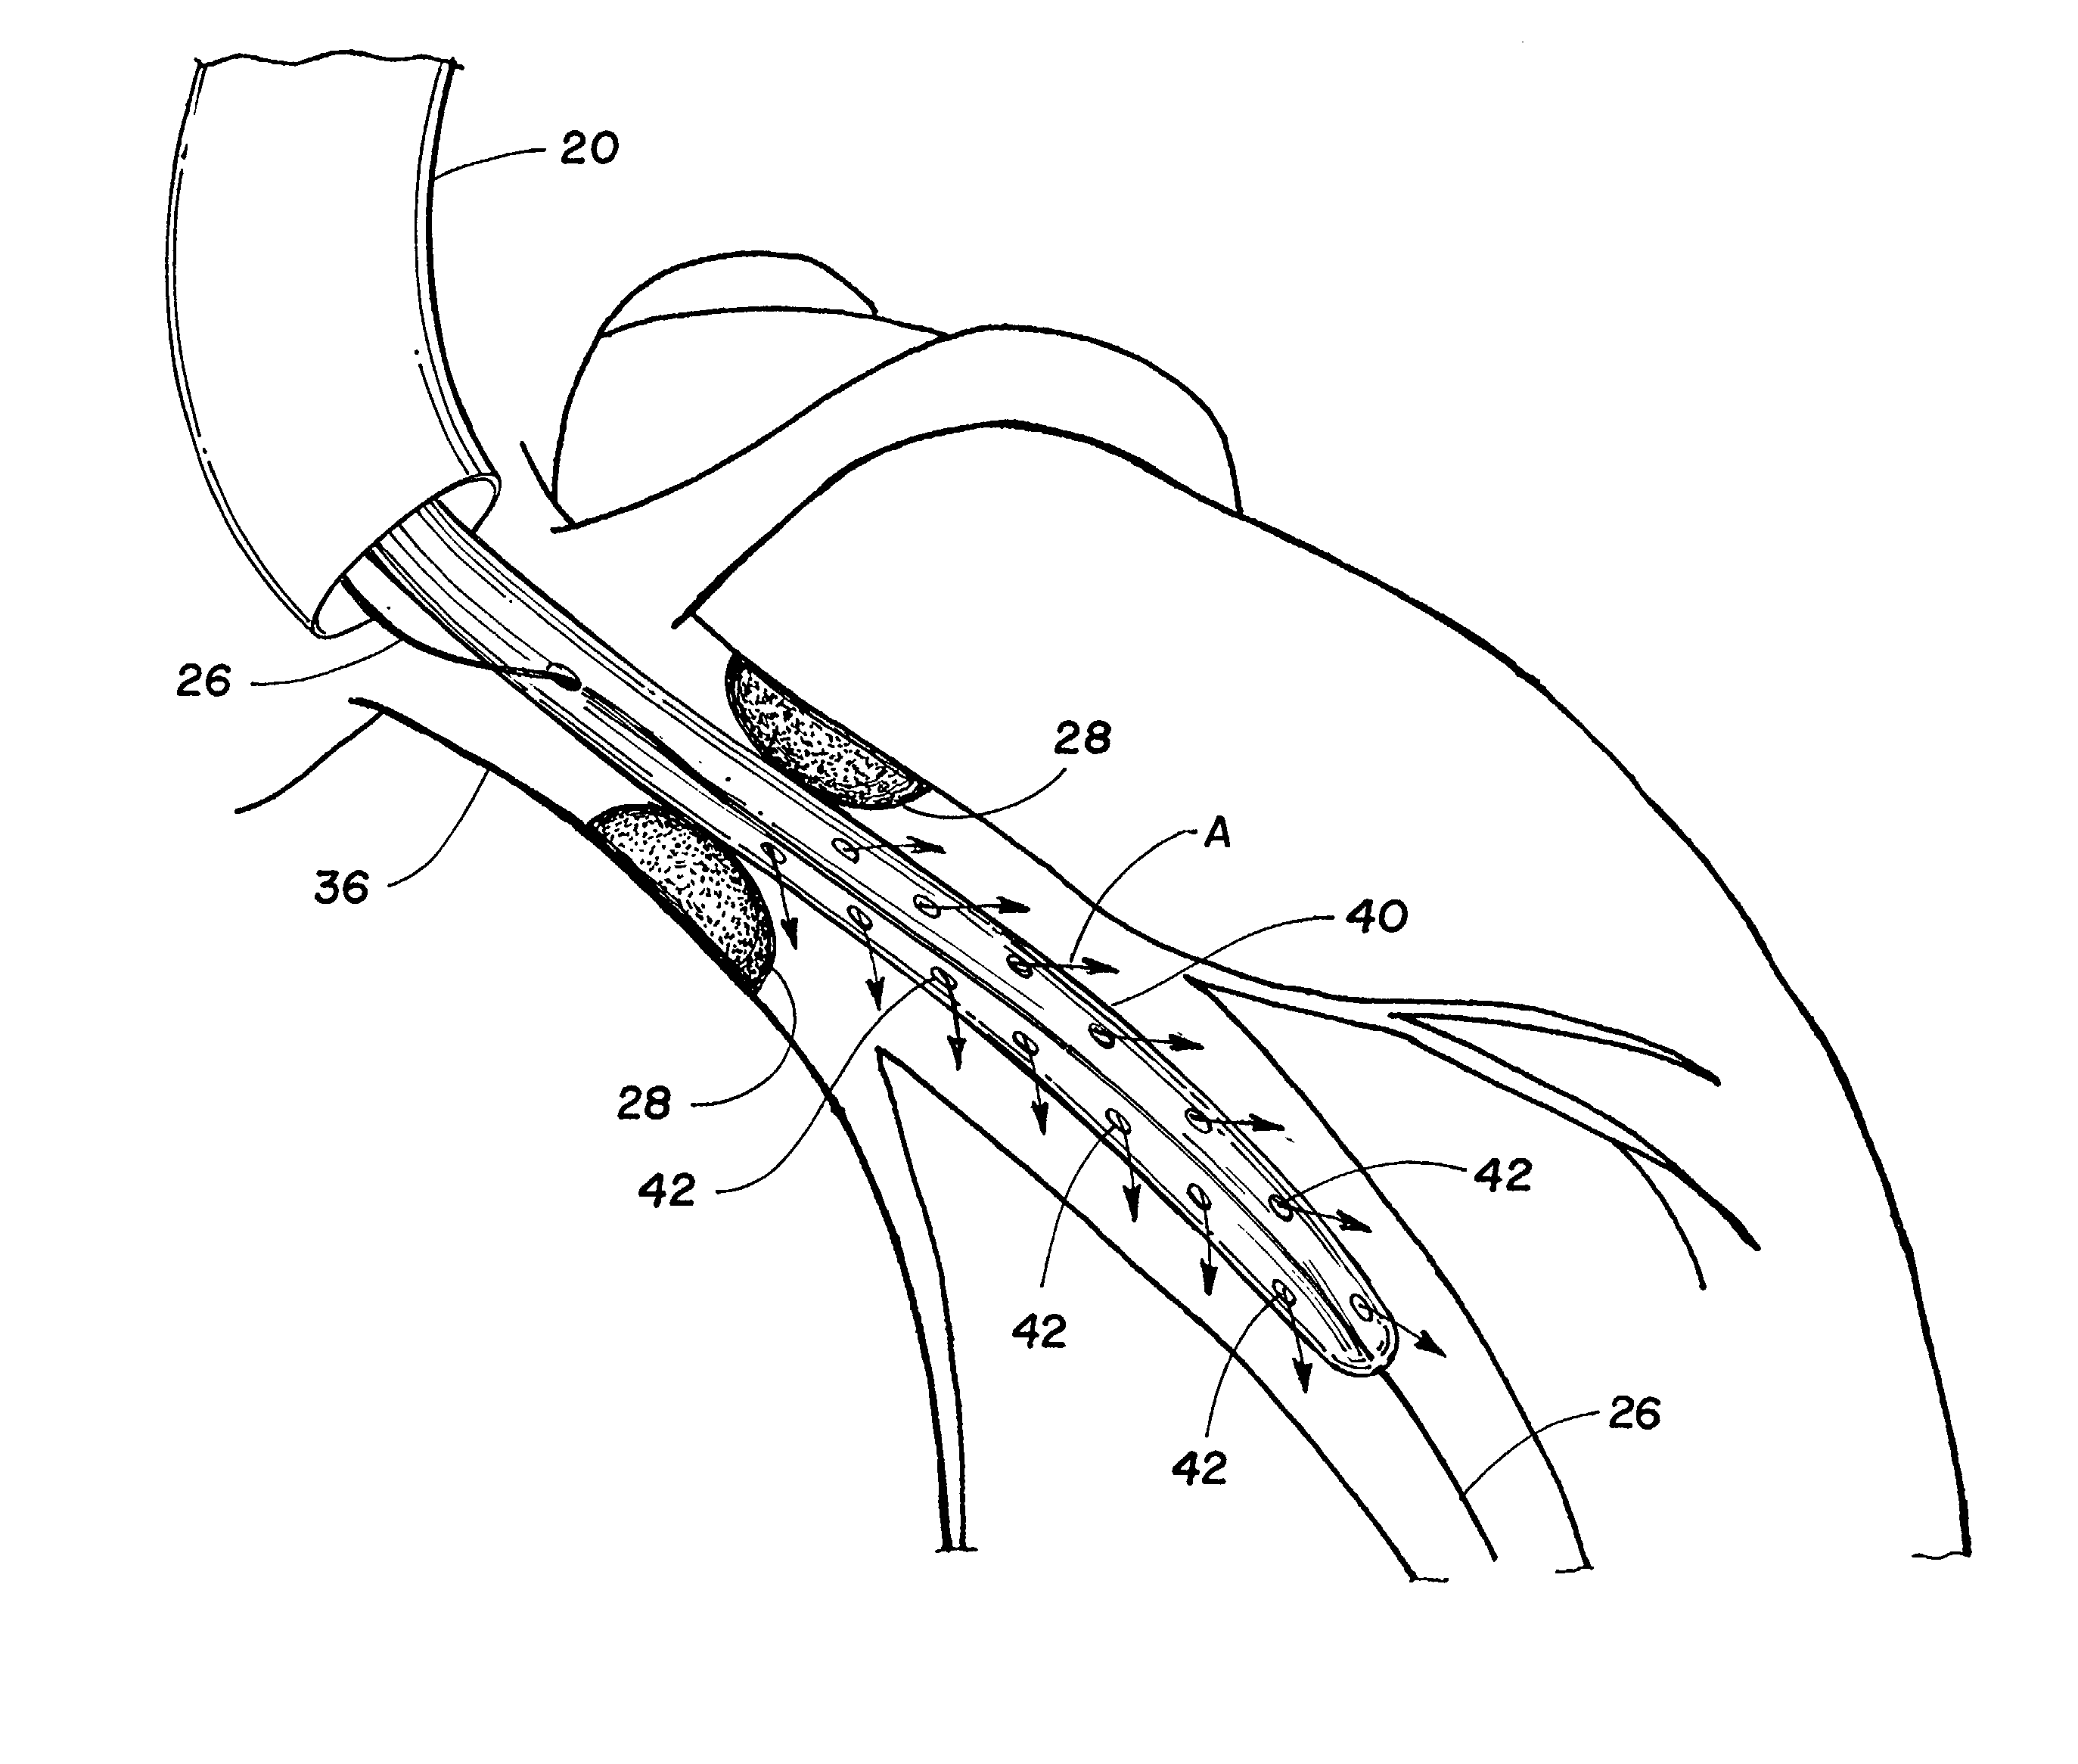 Perfusion procedure and apparatus for preventing necrosis following failed balloon angioplasty